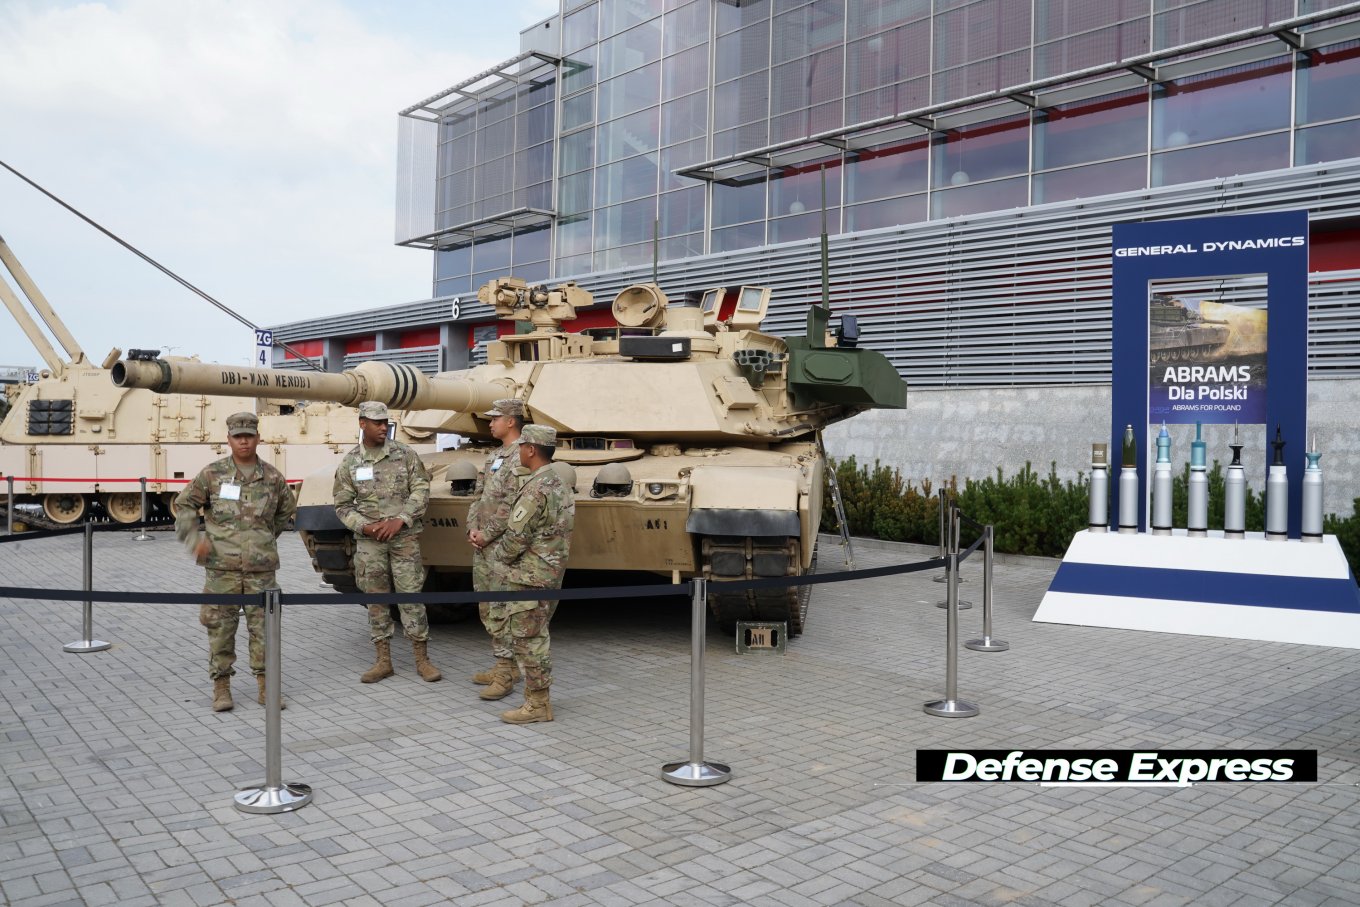 The MSPO exhibition is among the favorite events of Poles, Poland Starts Preparation for the MSPO 2023 International Defense Industry Exhibition, Valerii Riabykh, Defense Express